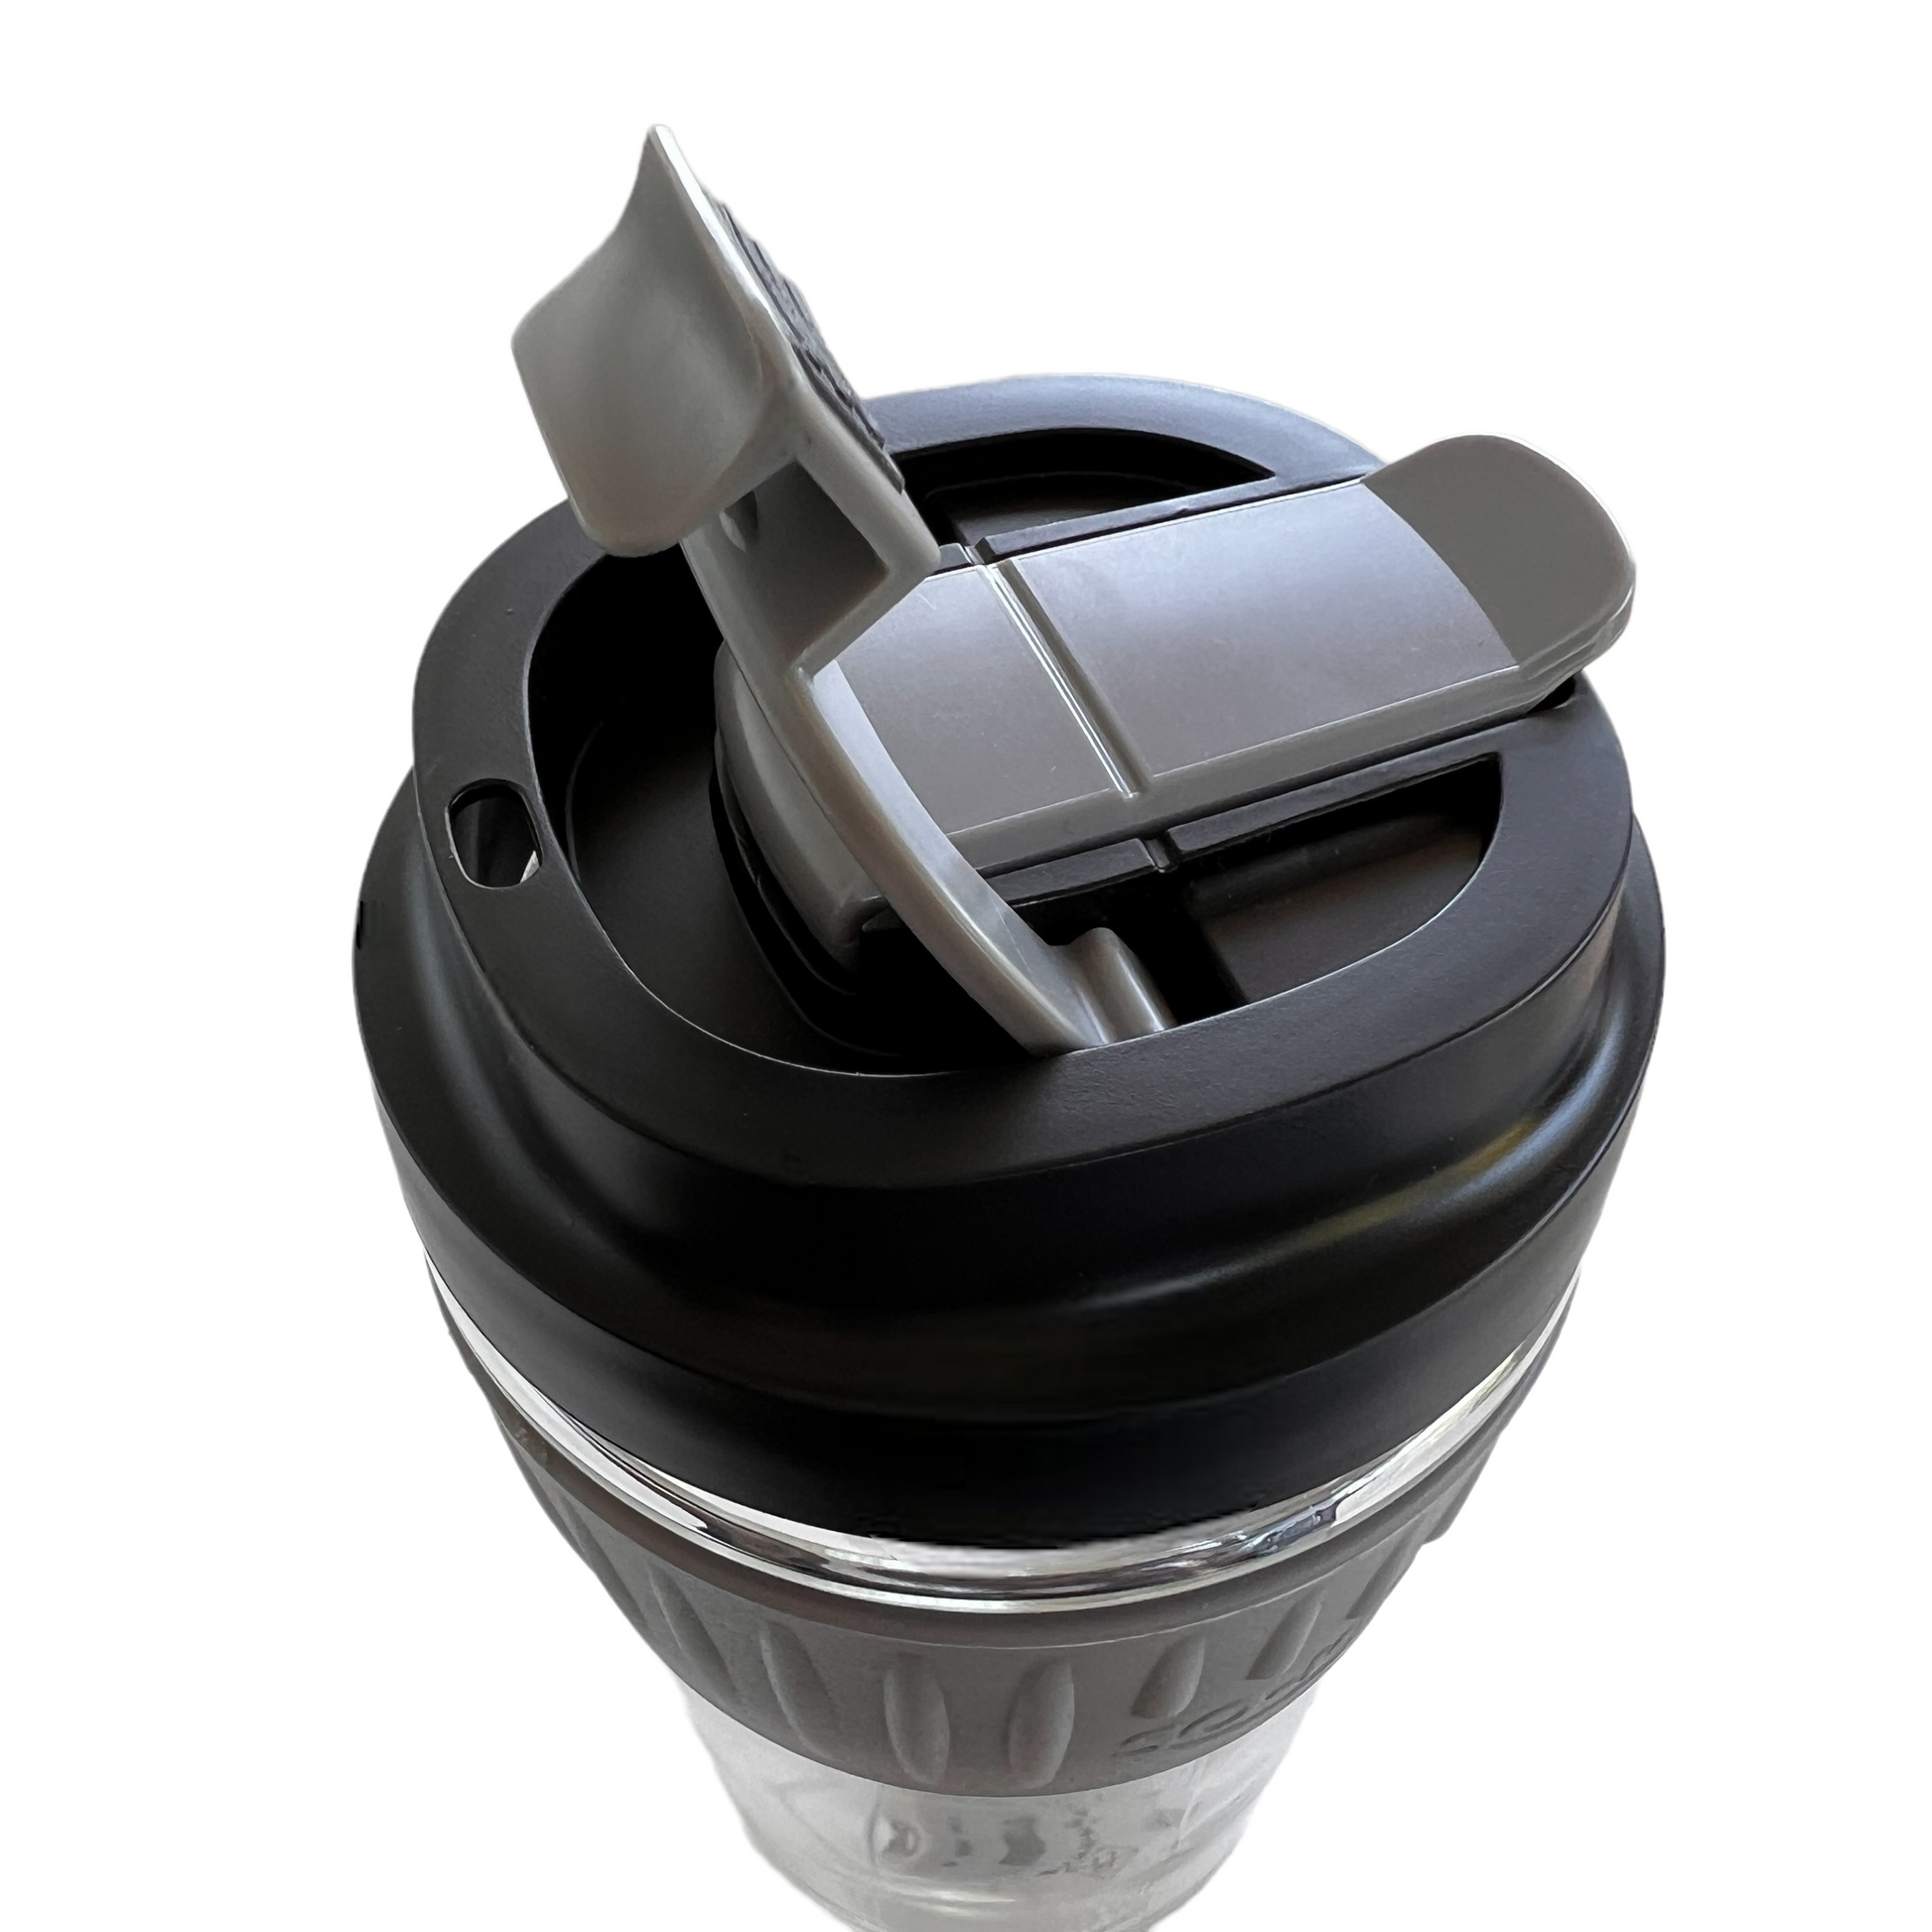 Heavy duty glass mug with lid and built in straw Mobility & Accessibility SPIRIT SPARKPLUGS   